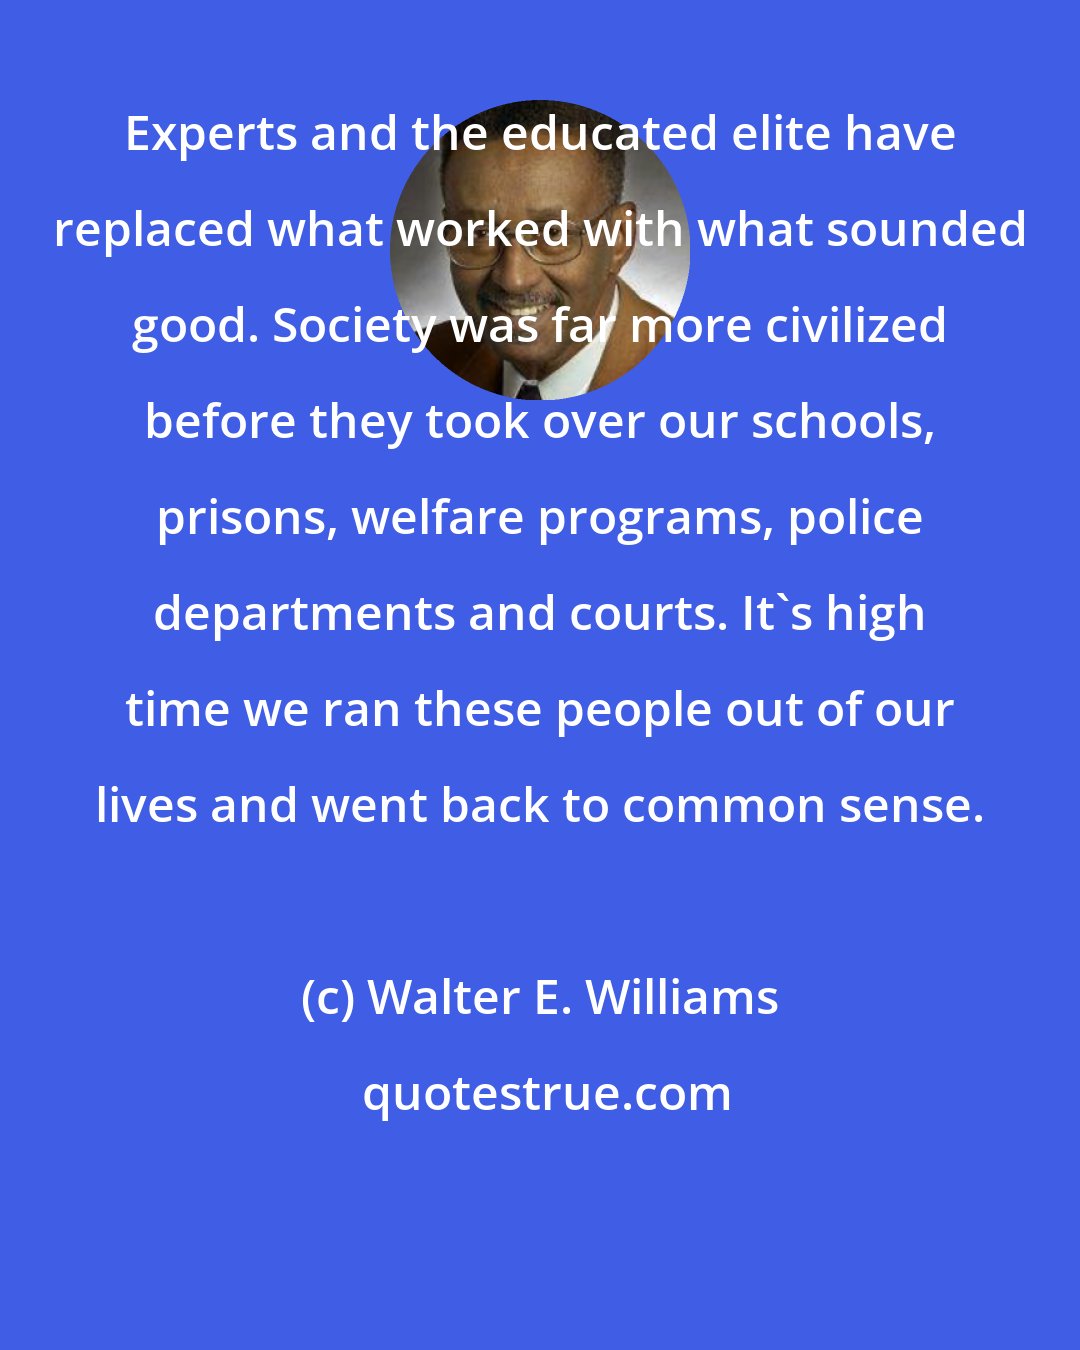 Walter E. Williams: Experts and the educated elite have replaced what worked with what sounded good. Society was far more civilized before they took over our schools, prisons, welfare programs, police departments and courts. It's high time we ran these people out of our lives and went back to common sense.